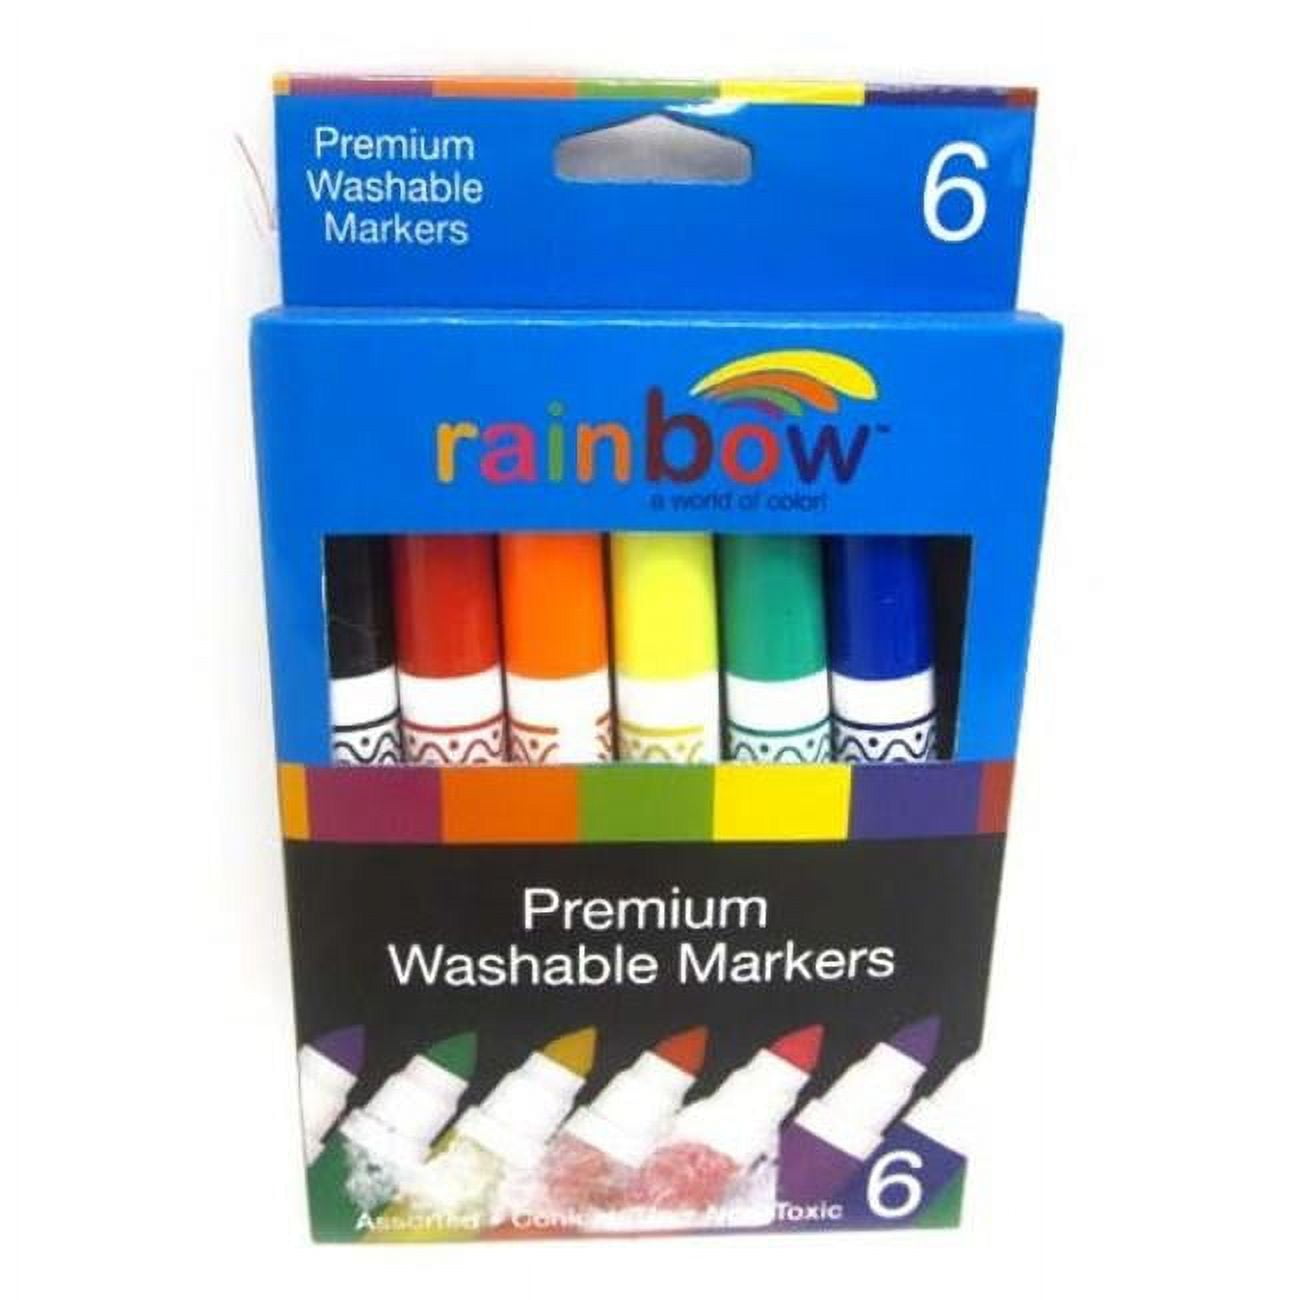 2324613 Premium Washable Markers - 6 Count - Case Of 48